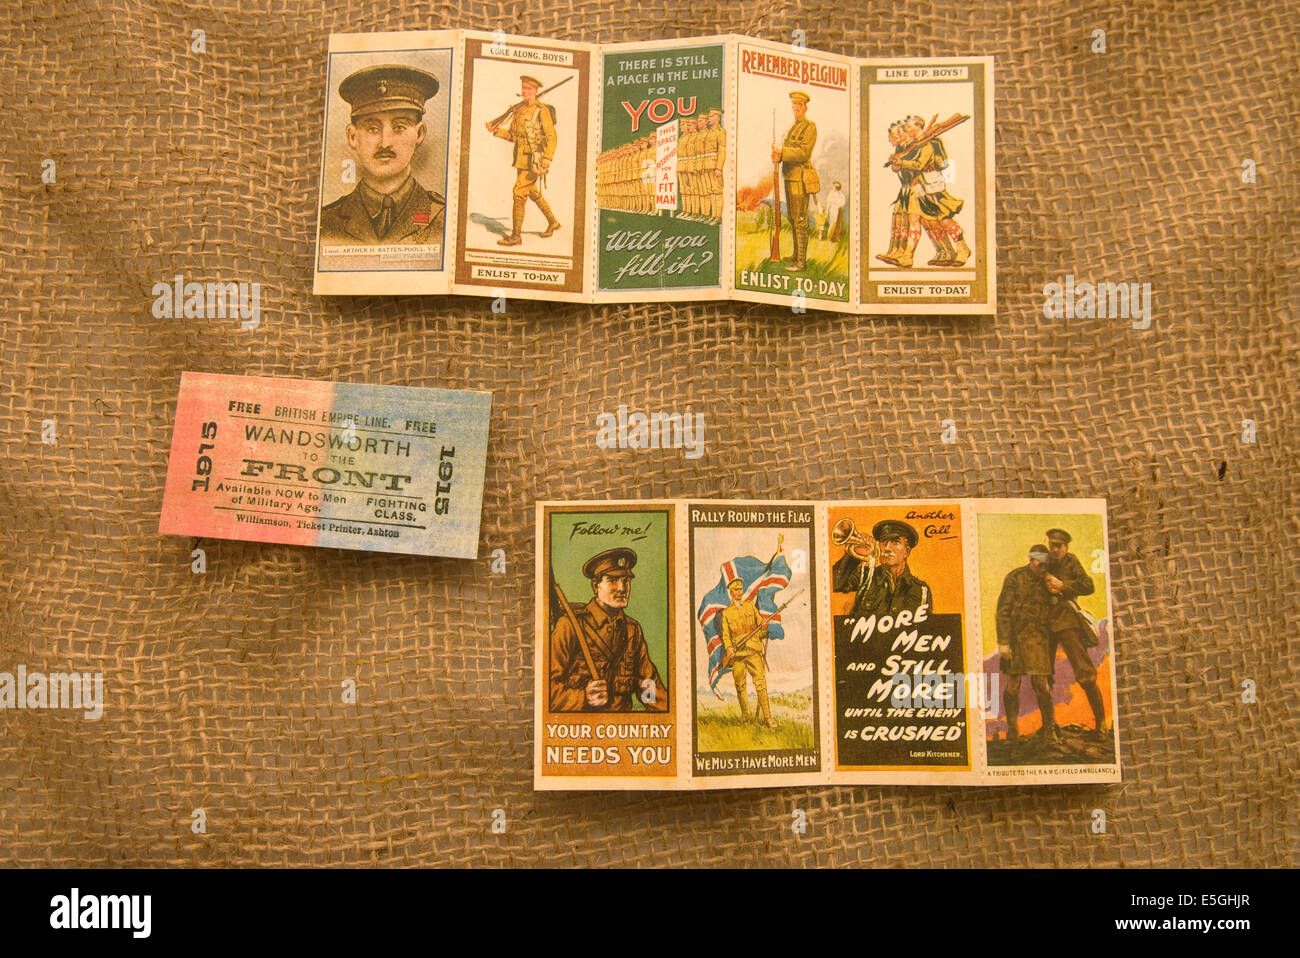 World War One memorabilia on display at a WW1 history event near Haslemere, Surrey, UK. Stock Photo